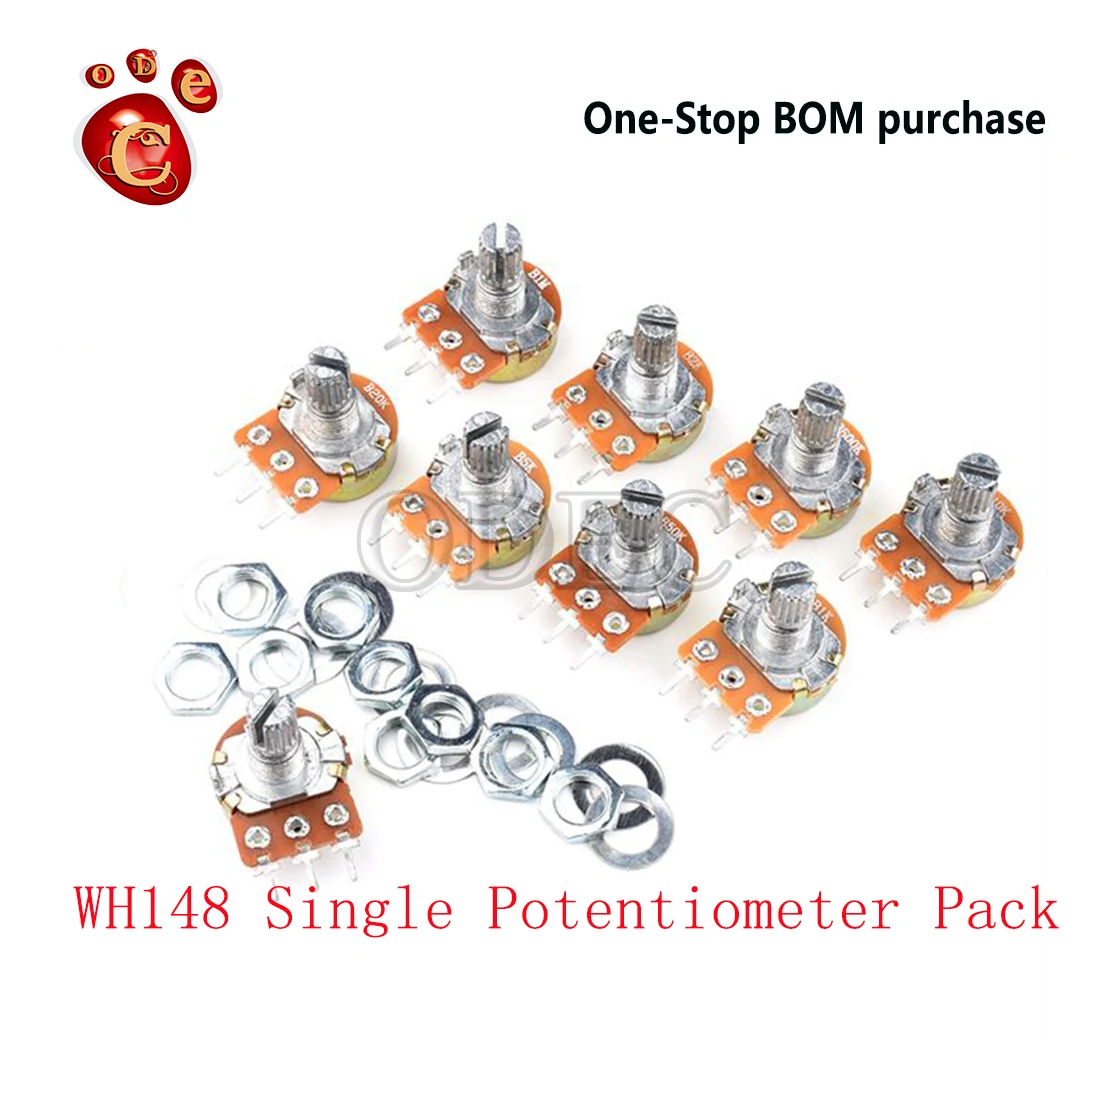 WH148 Single Potentiometer Pack Element Pack 9 Resistance Values B1/2/5/20/50K-1M 3 Pin Handle Length 15MM minisas hd to minisas l 780mm single pack moq 1 90sk0000 m90an0